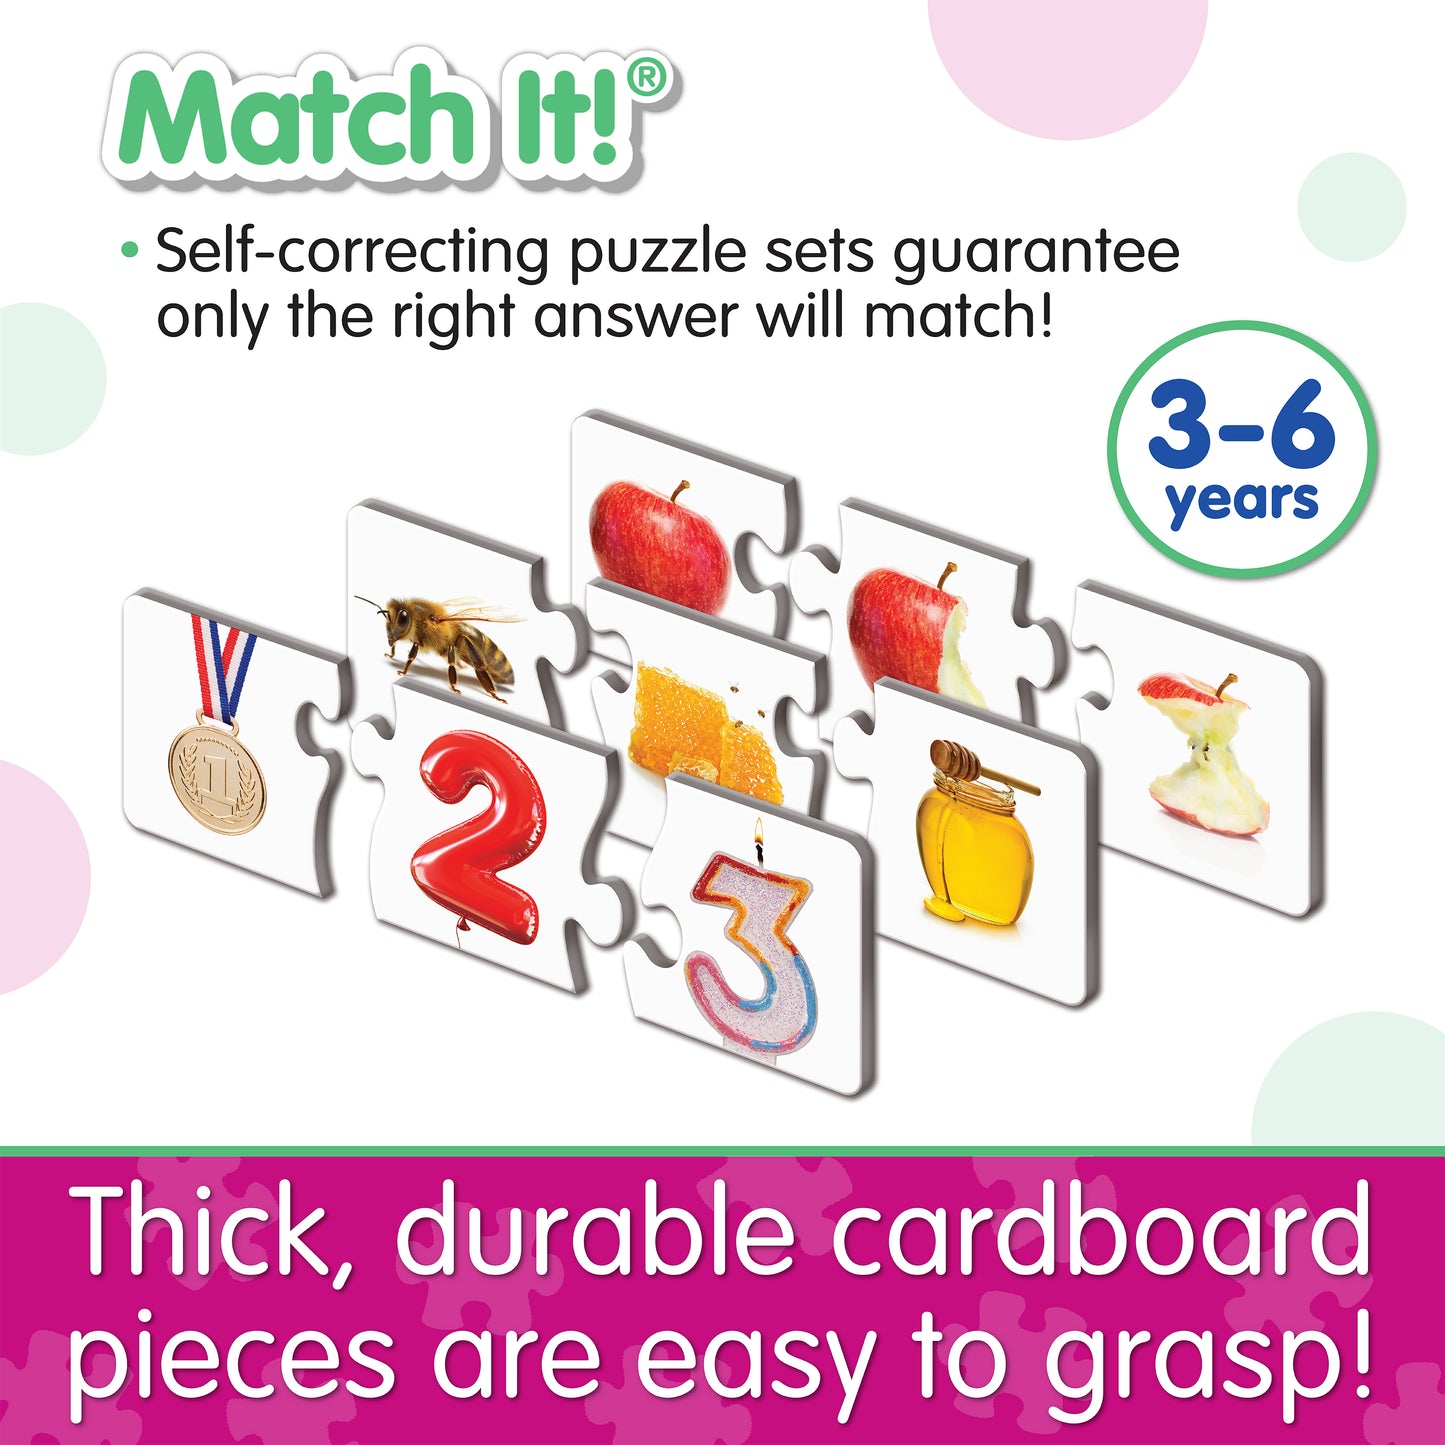 Infographic about Match It - Sequencing's features that says, "Thick, durable cardboard pieces are easy to grasp!"